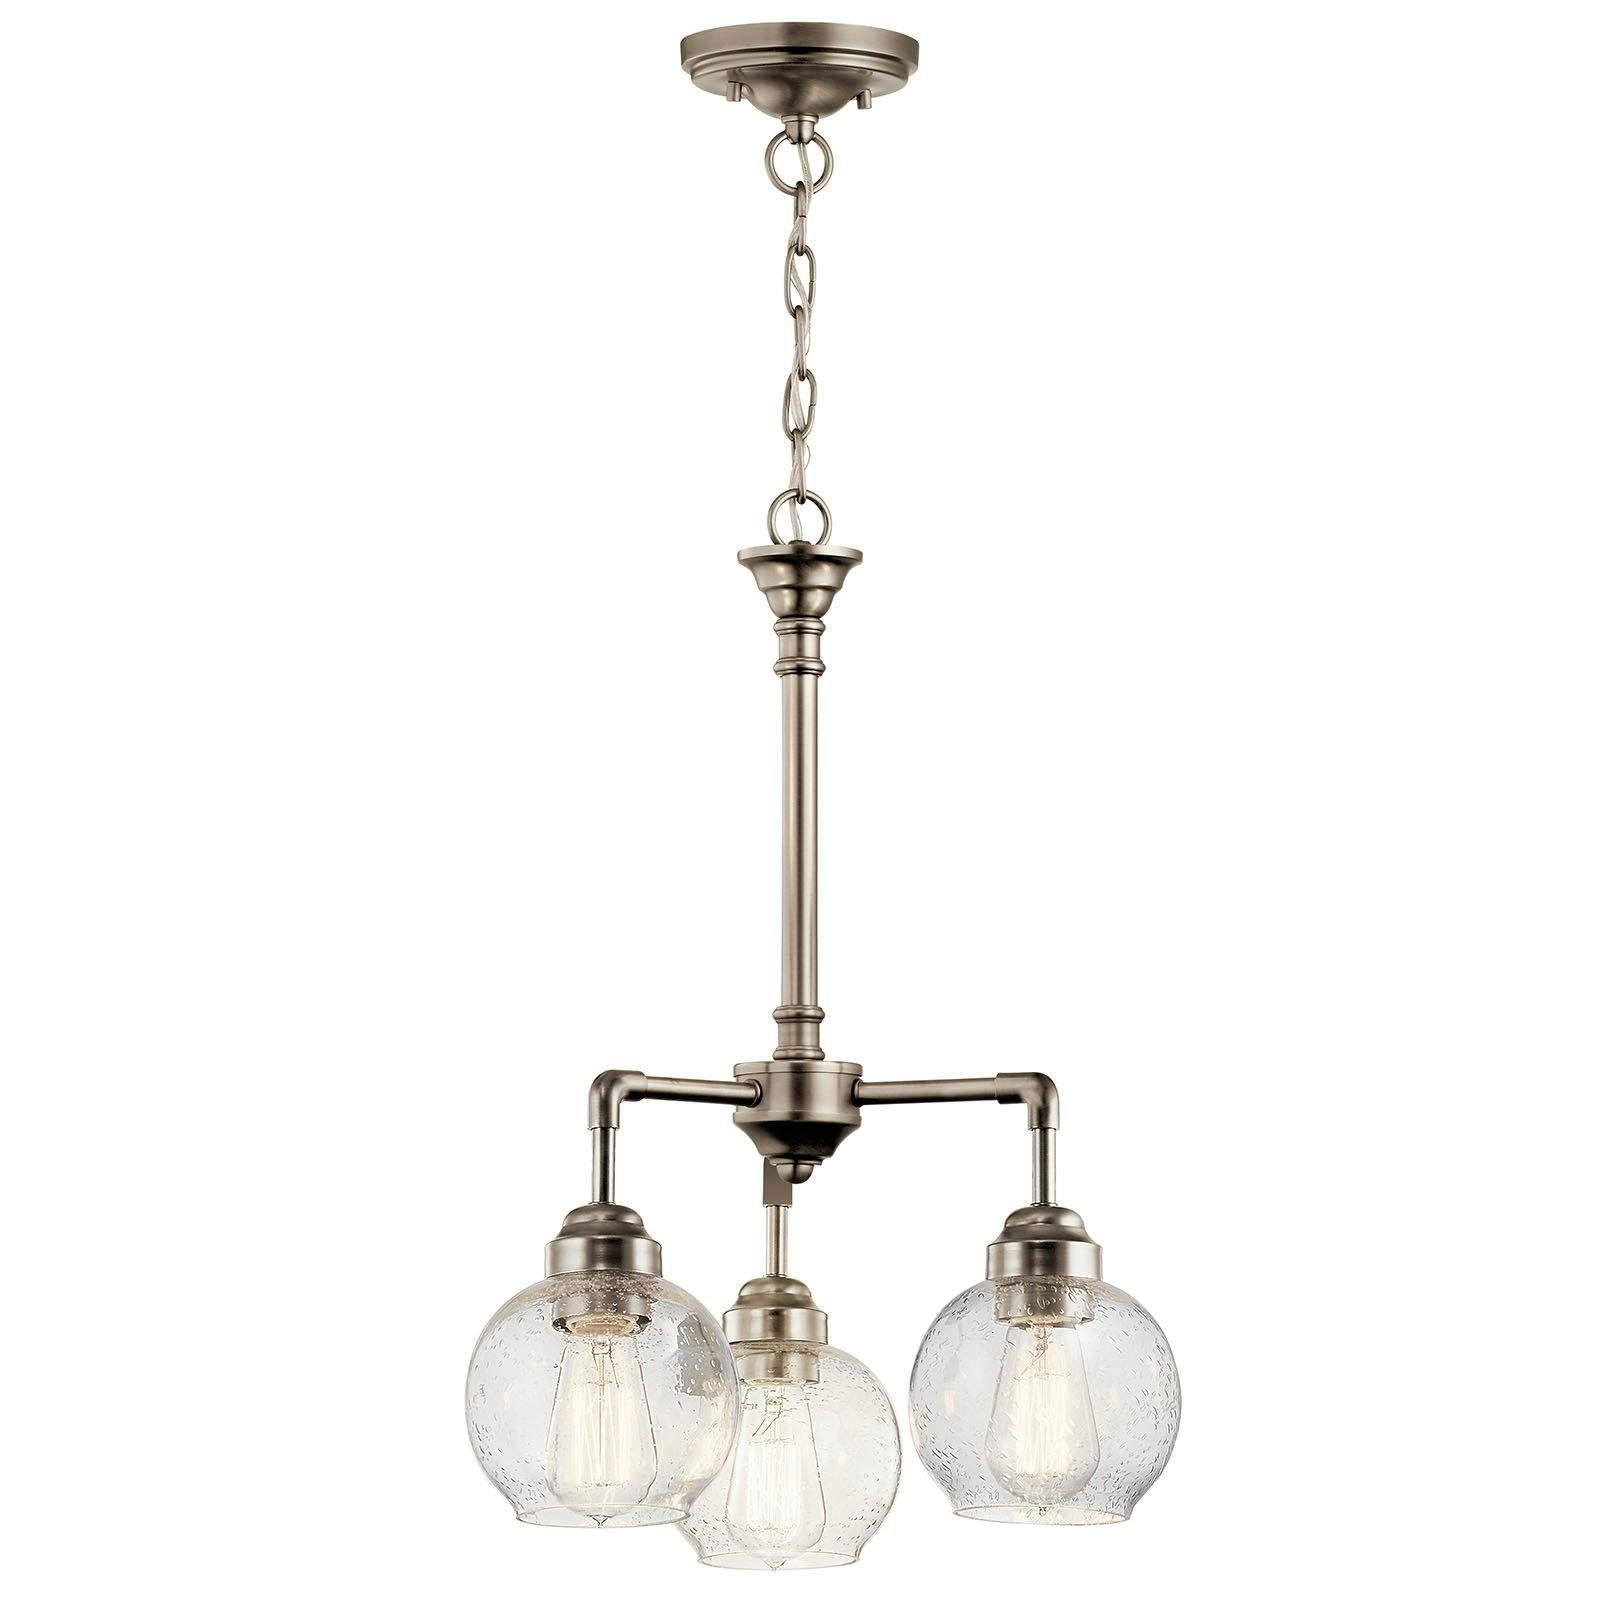 The Niles 3 Light Chandelier Antique Pewter facing down on a white background